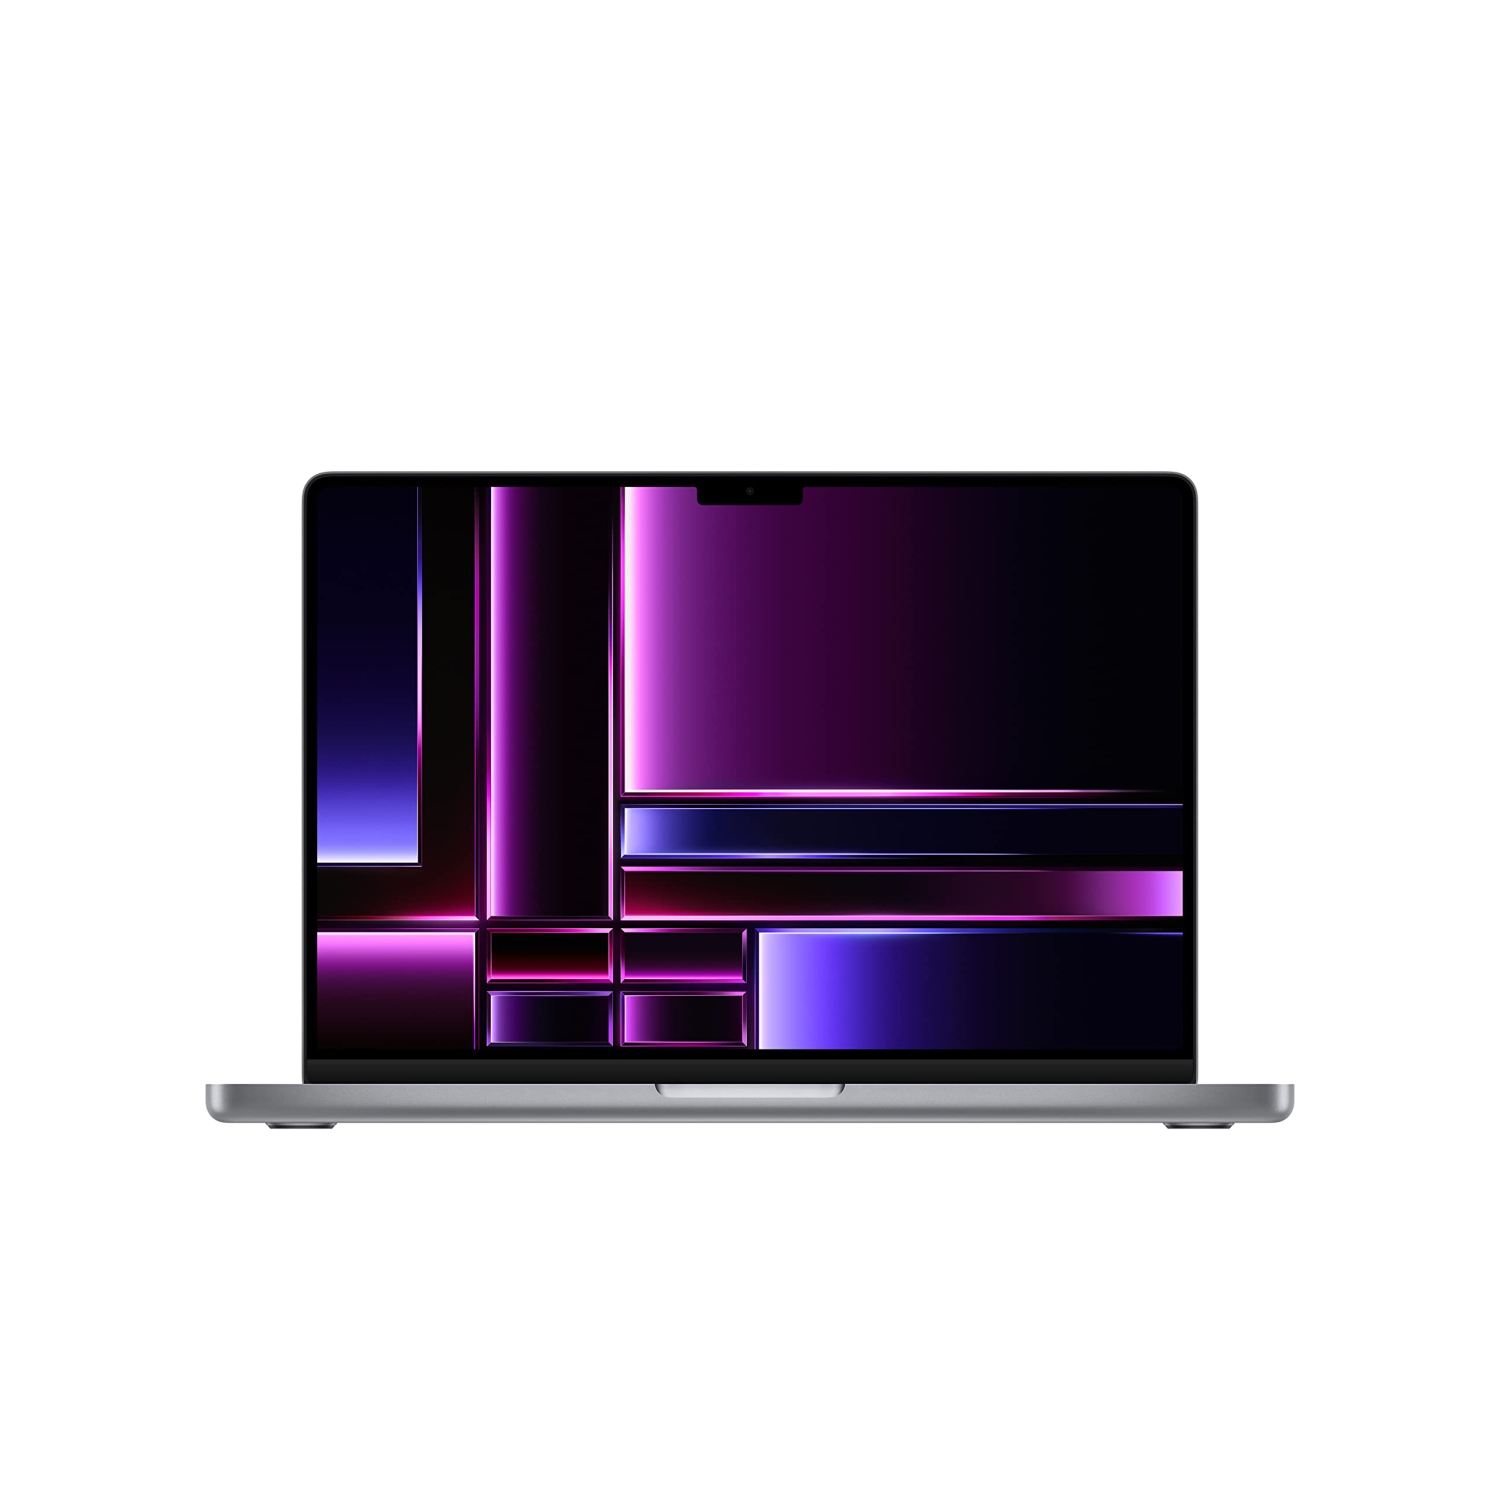 Refurbished (Excellent) - Apple 2023 MacBook Pro Laptop M2 Max chip with 12‑core CPU and 30‑core GPU: 14.2-inch Display, 32GB Unified Memory, 1TB SSD Storage - Space Gray